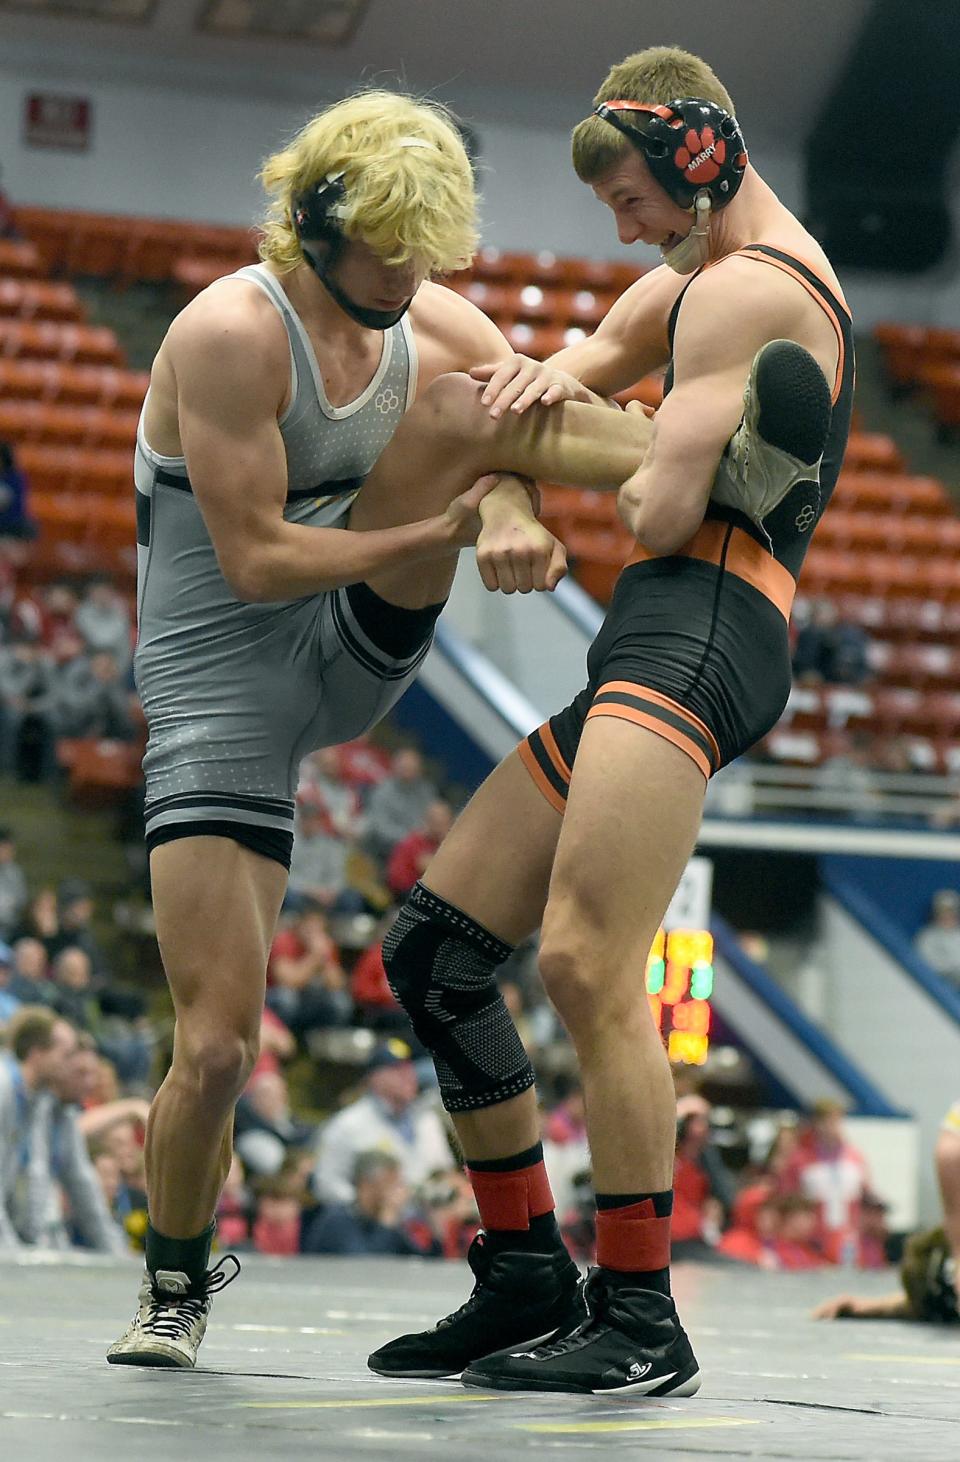 Austin Marry of Hudson takes down Jack Bagwell of Martin/Climax Scott at 144 pounds going on for the win 12-3 in the D4 team semifinals at the Wings Event Center in Kalamazoo Saturday, February 25, 2023.